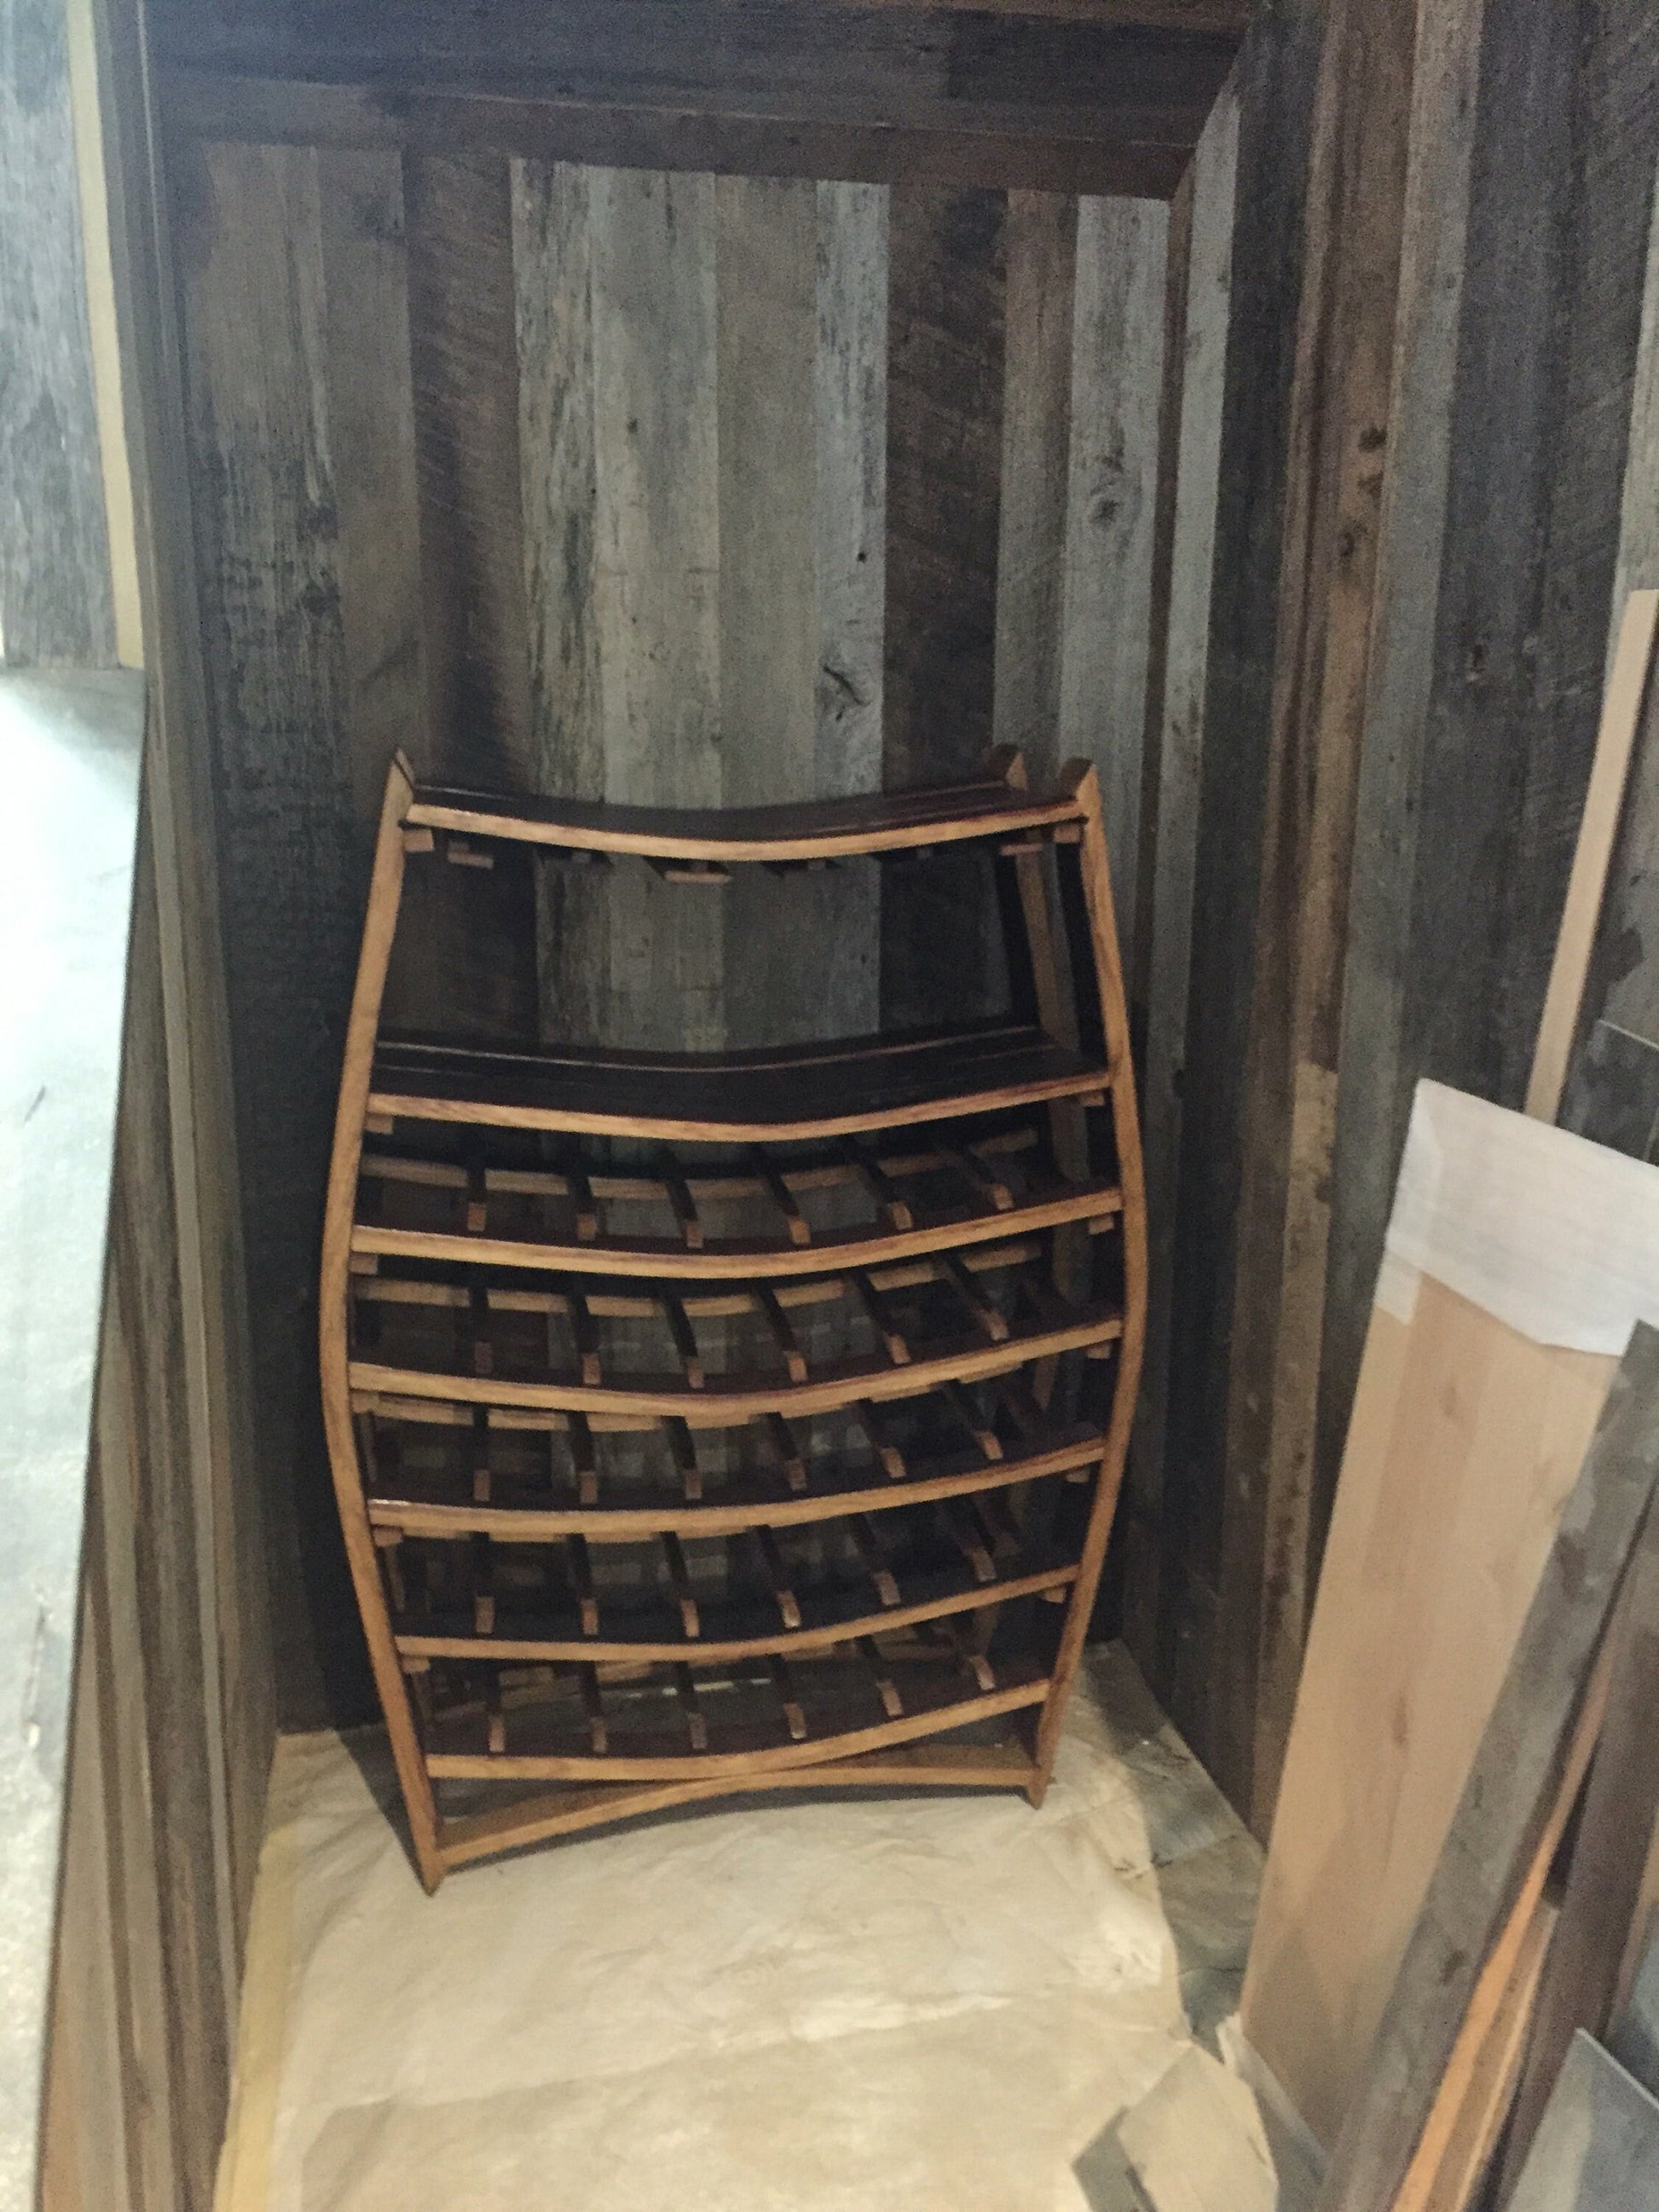 Large Wine and Glass Rack - Chablis - Made from retired California wine barrels. 100% Recycled!